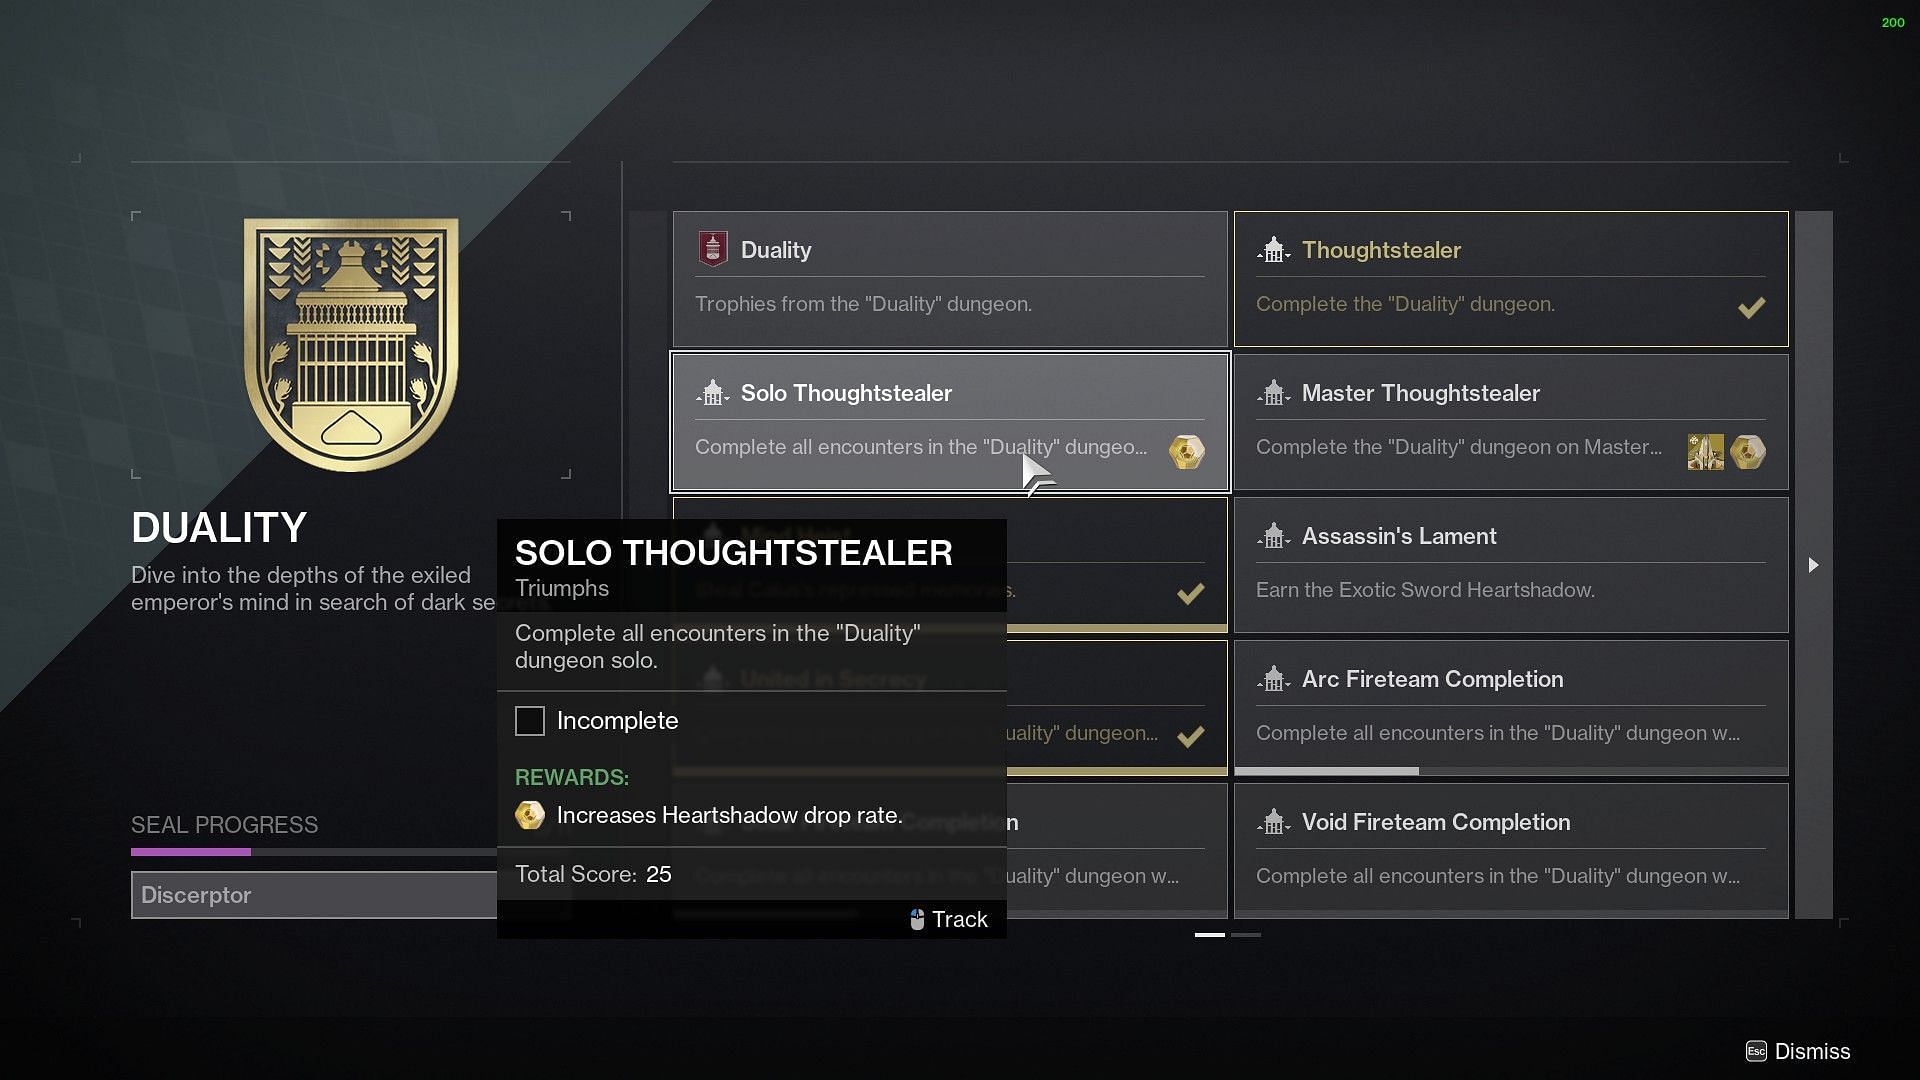 Solo Thoughtstealer triumph in Destiny 2 (Image via Bungie)